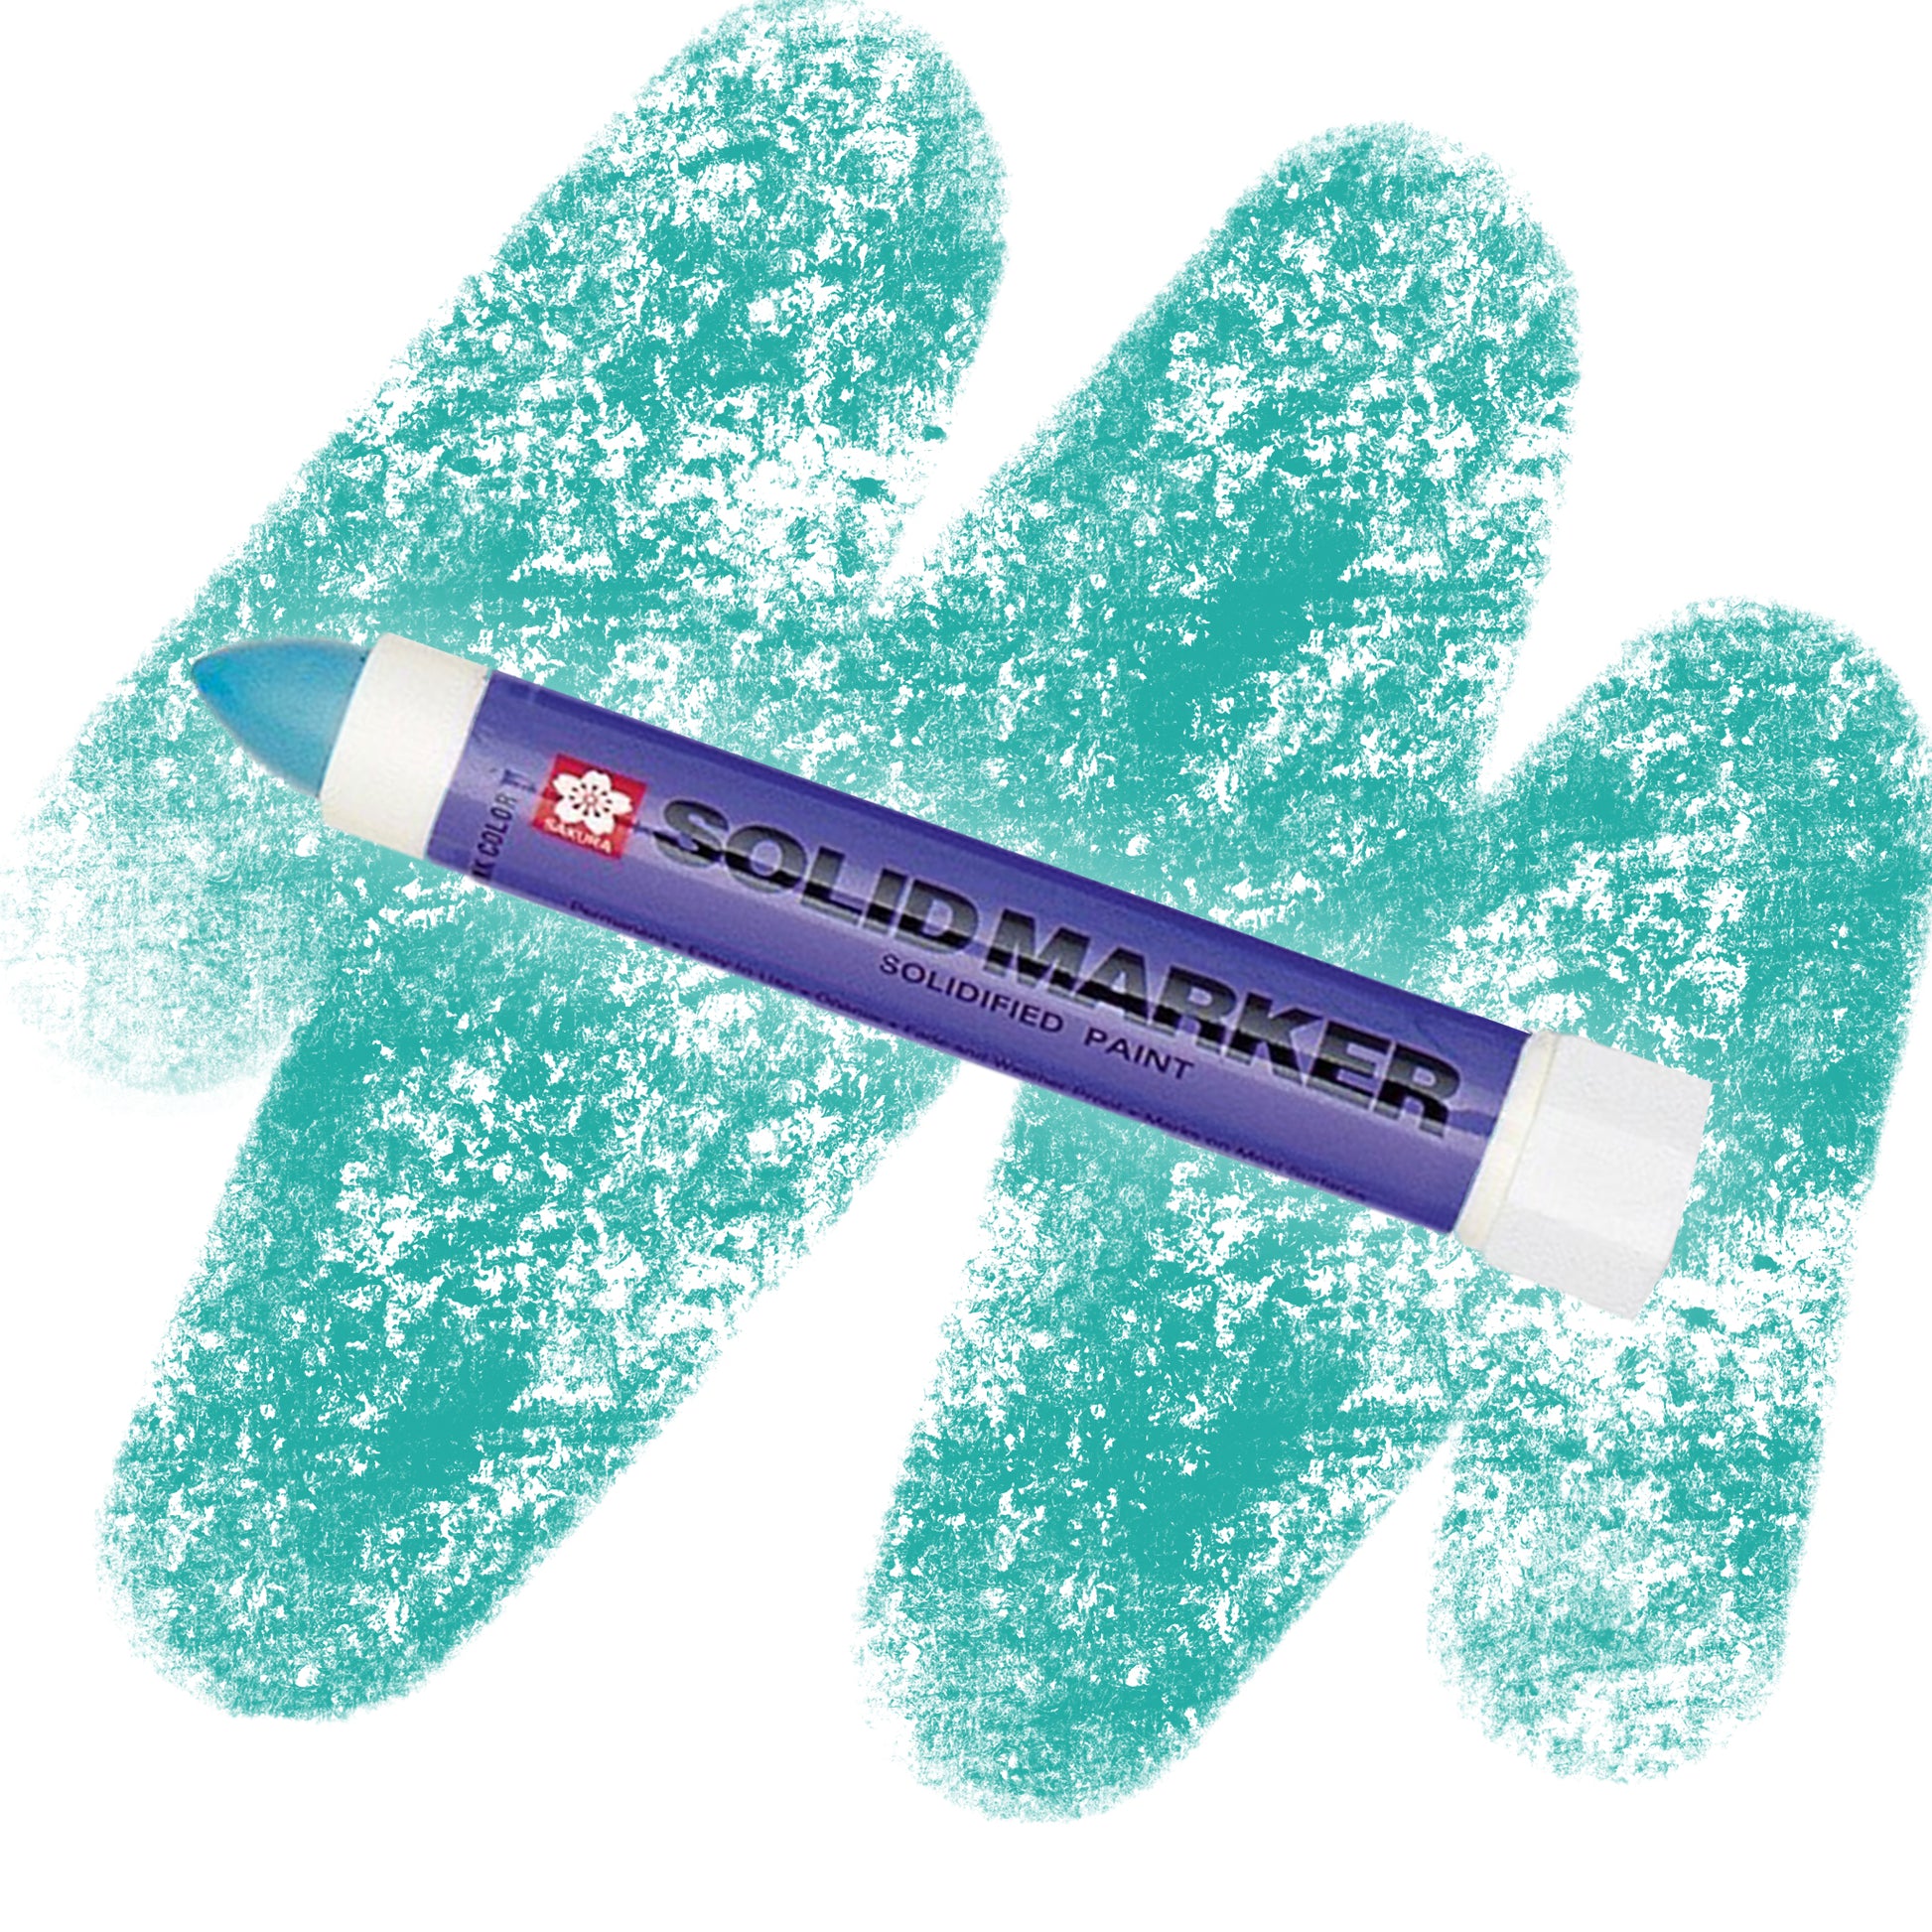 A green marker with a purple label that reads " SOLID MARKER" with a green crayon swatch.